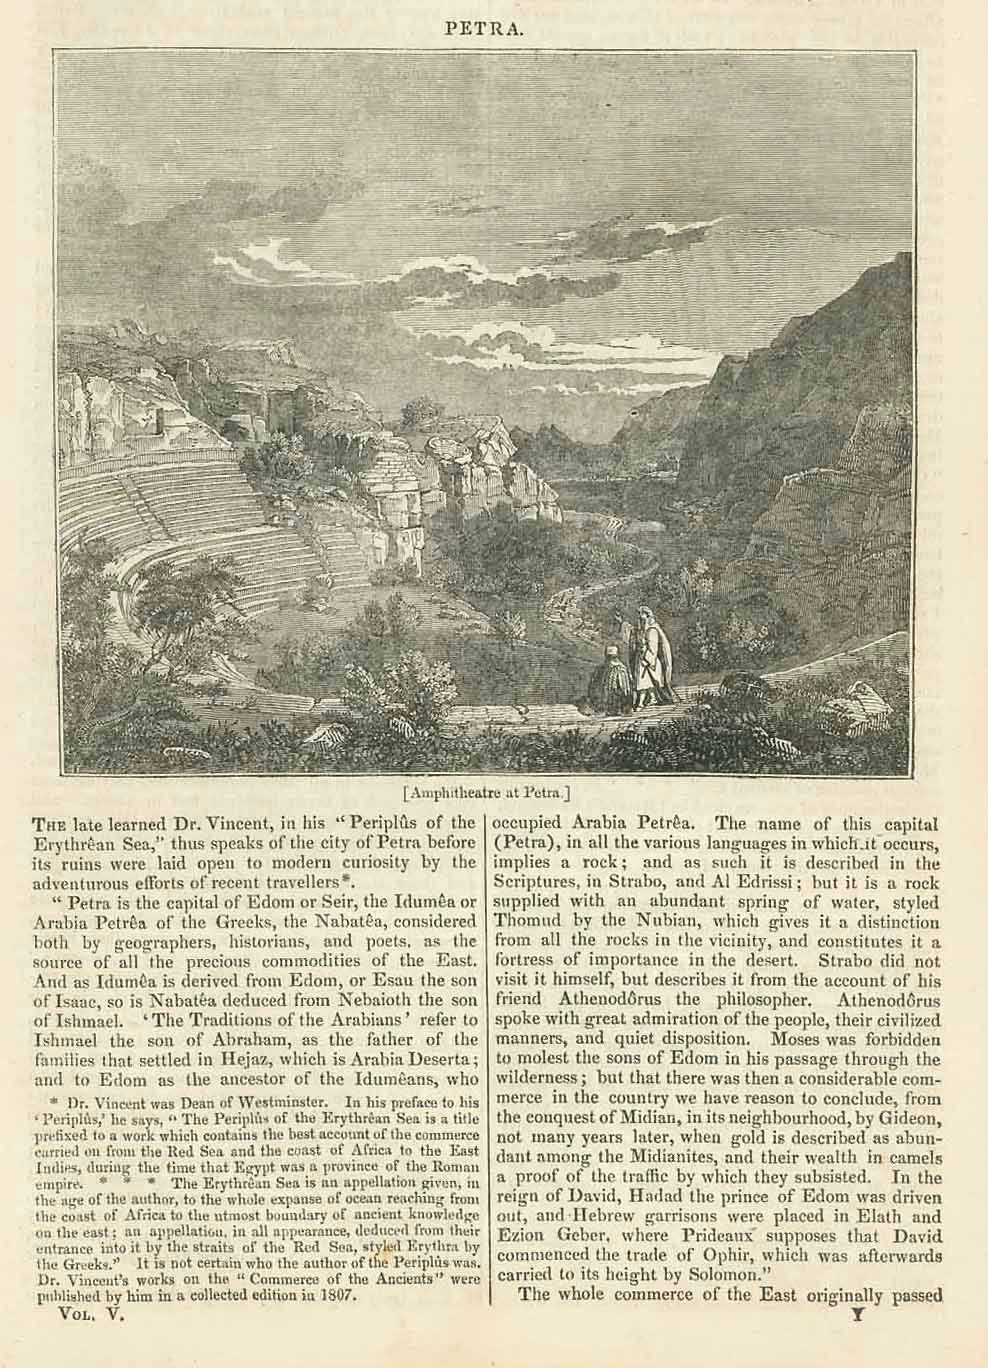 "Amphitheater at Petra"  Jordan  Wood engraving on a page of text about Petra and the archeological excavations that continues on the reverse side and on a second page. Published 1836., interior design, wall decoration, ideas, idea, gift ideas, present, vintage, charming, special, decoration, home interior, living room design